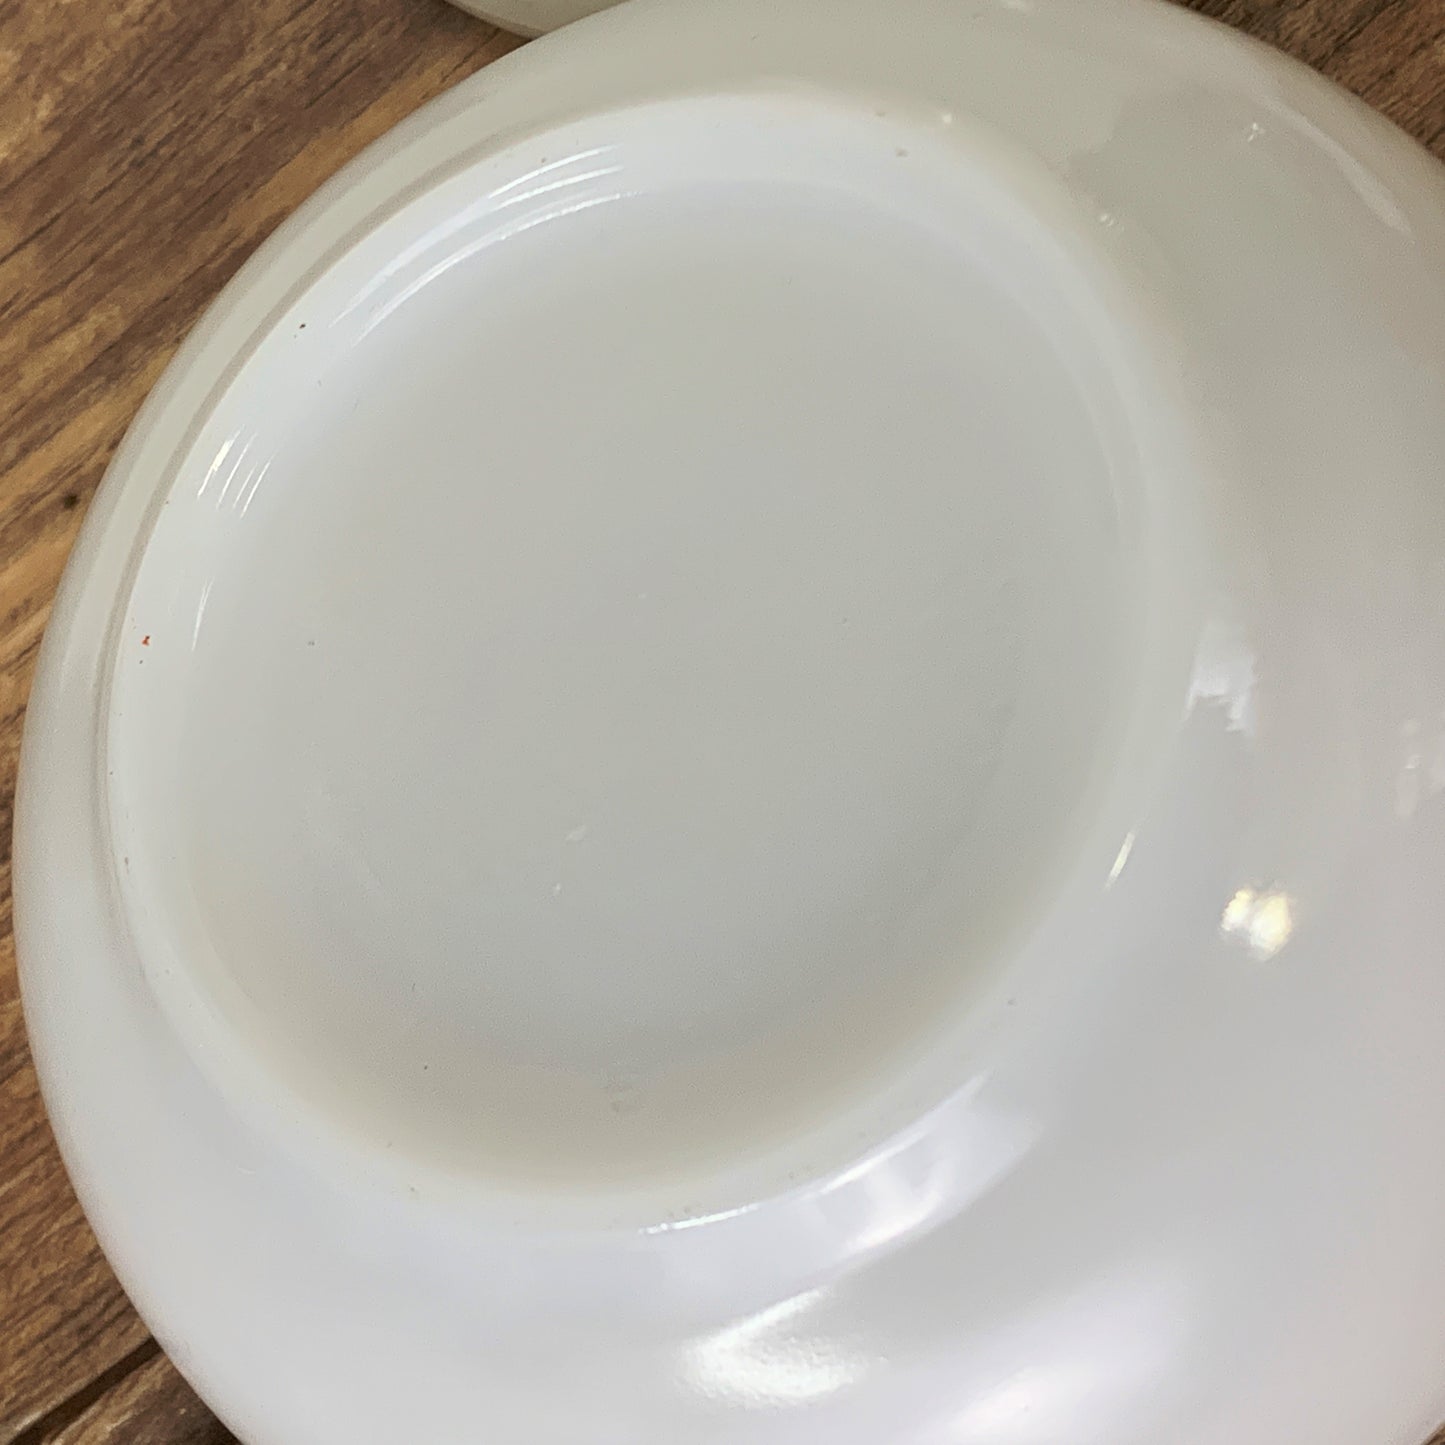 Milk Glass Soup Bowls with Handles - Set of 2